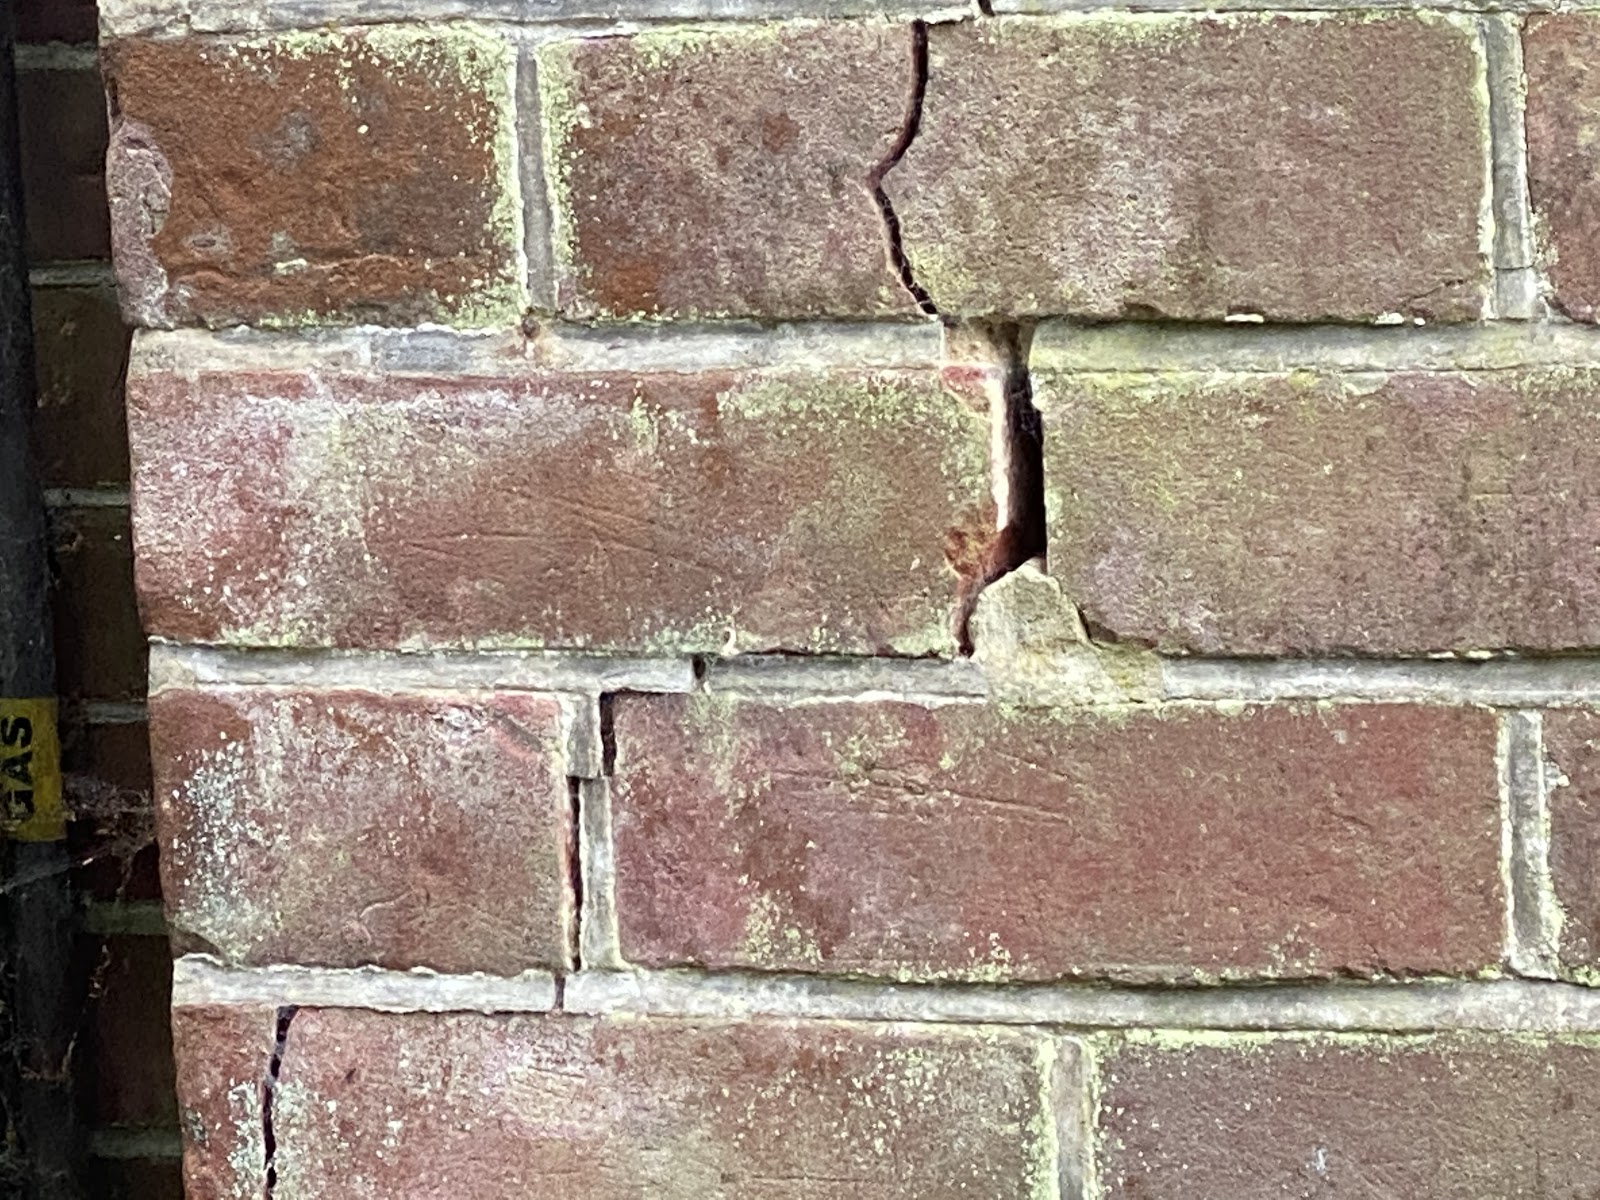 This image shows a crack in the brick work as a result of no gully surround.